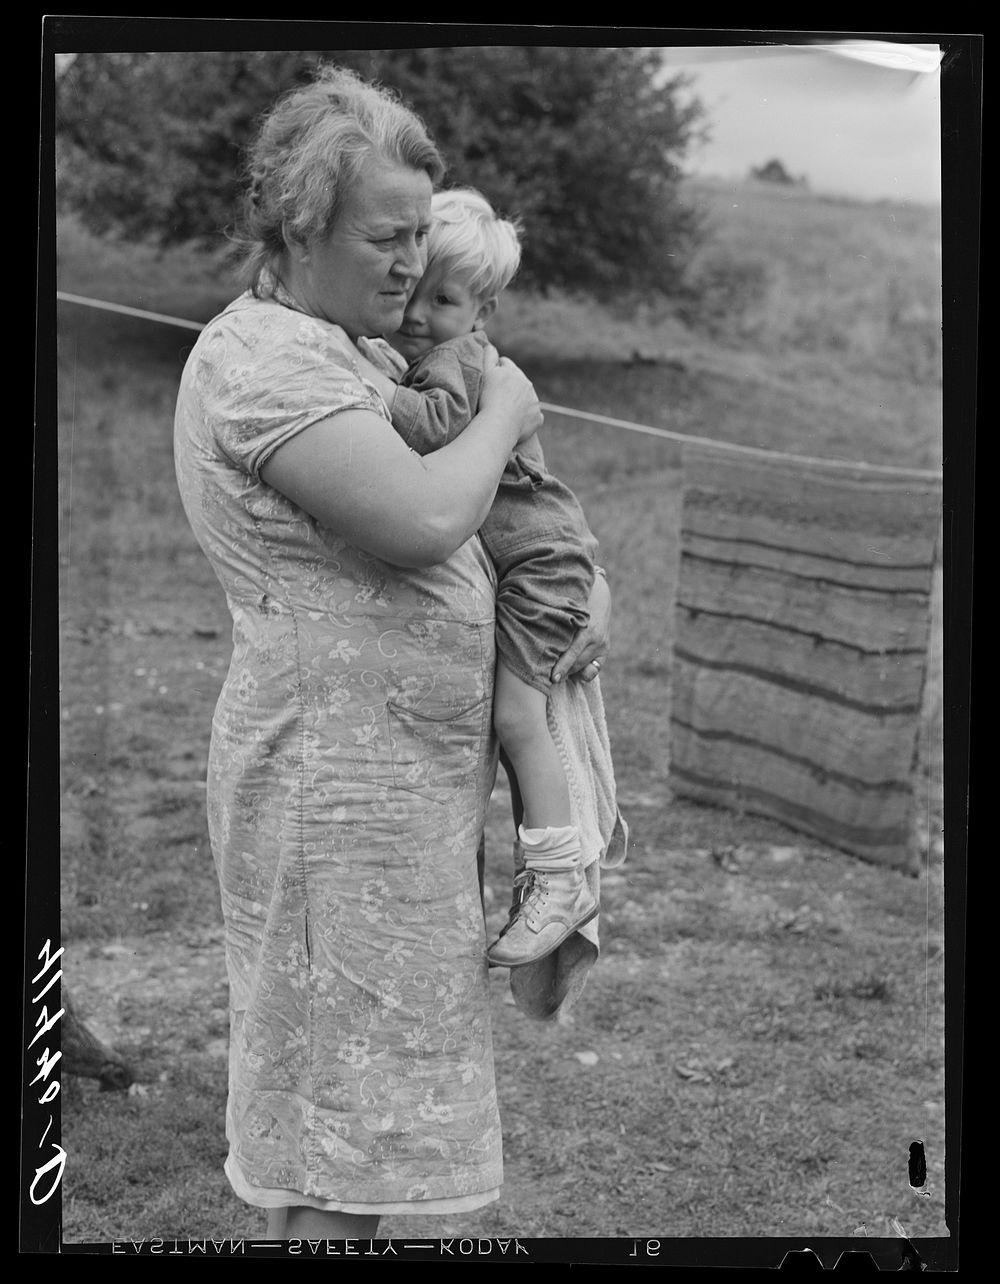 Farm woman holding one of her children in submarginal farm area of Rumsey Hill, near Erin, New York. Sourced from the…